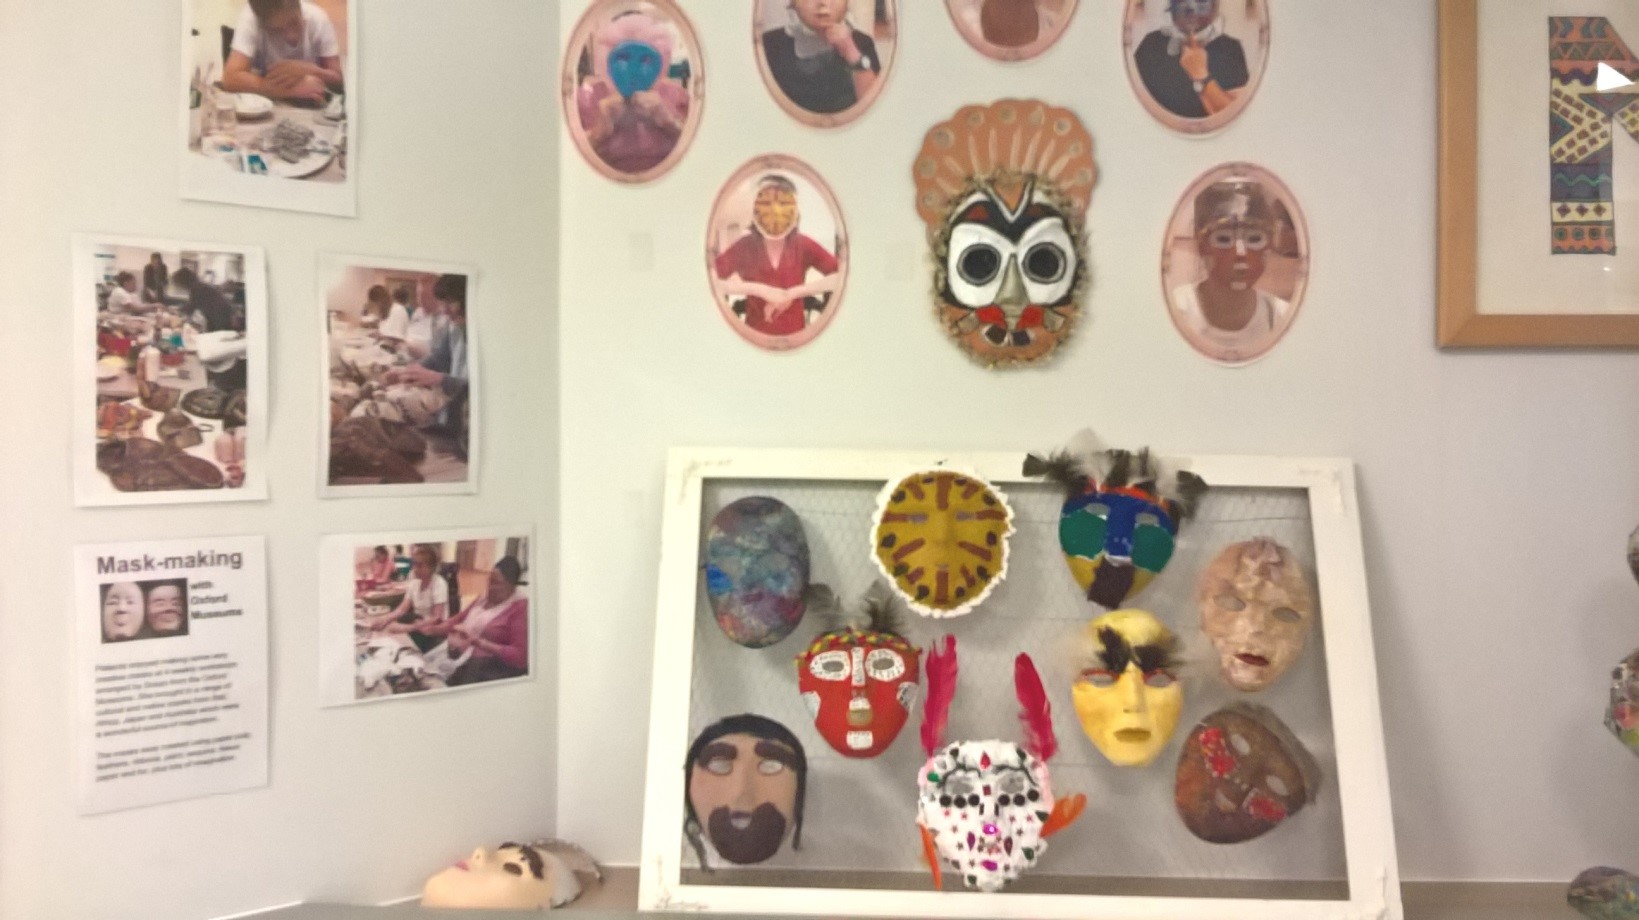 Display of masks created by project participants